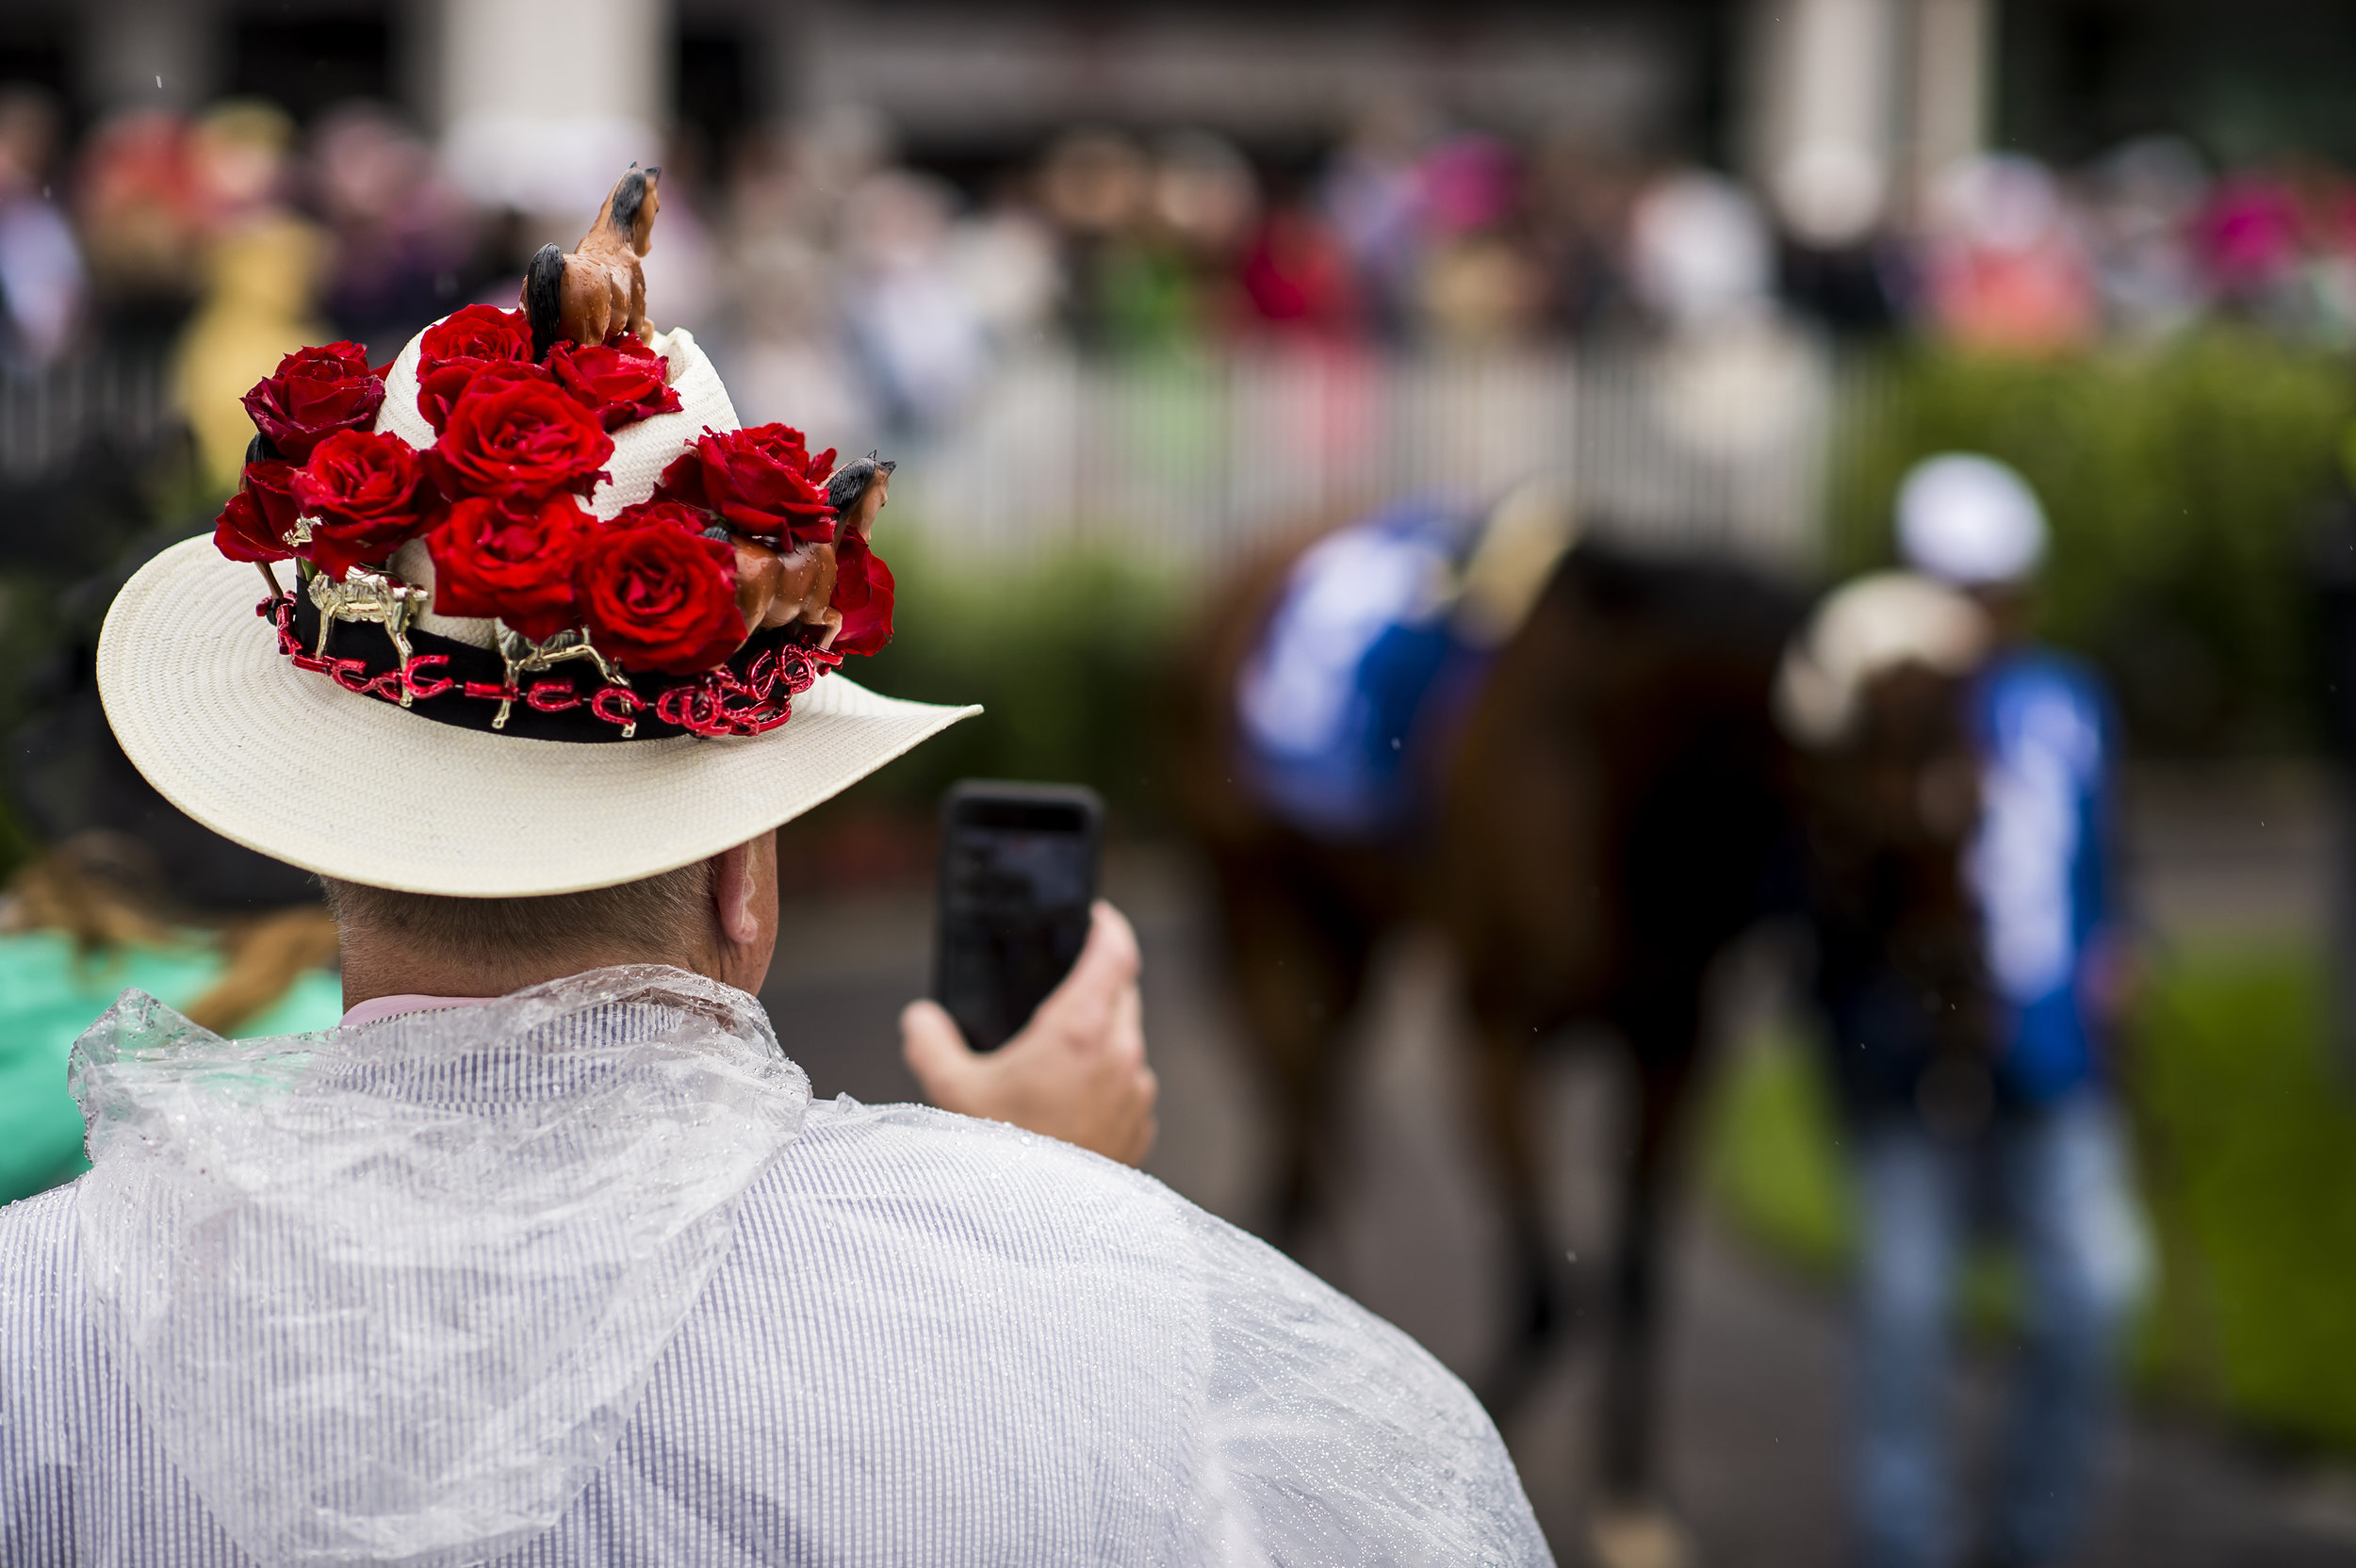  Louisville, KY - May 5:  on May 5th, 2017 at Churchill Downs in Louisville, Kentucky. (Photo by Matthew Thomas) 
 